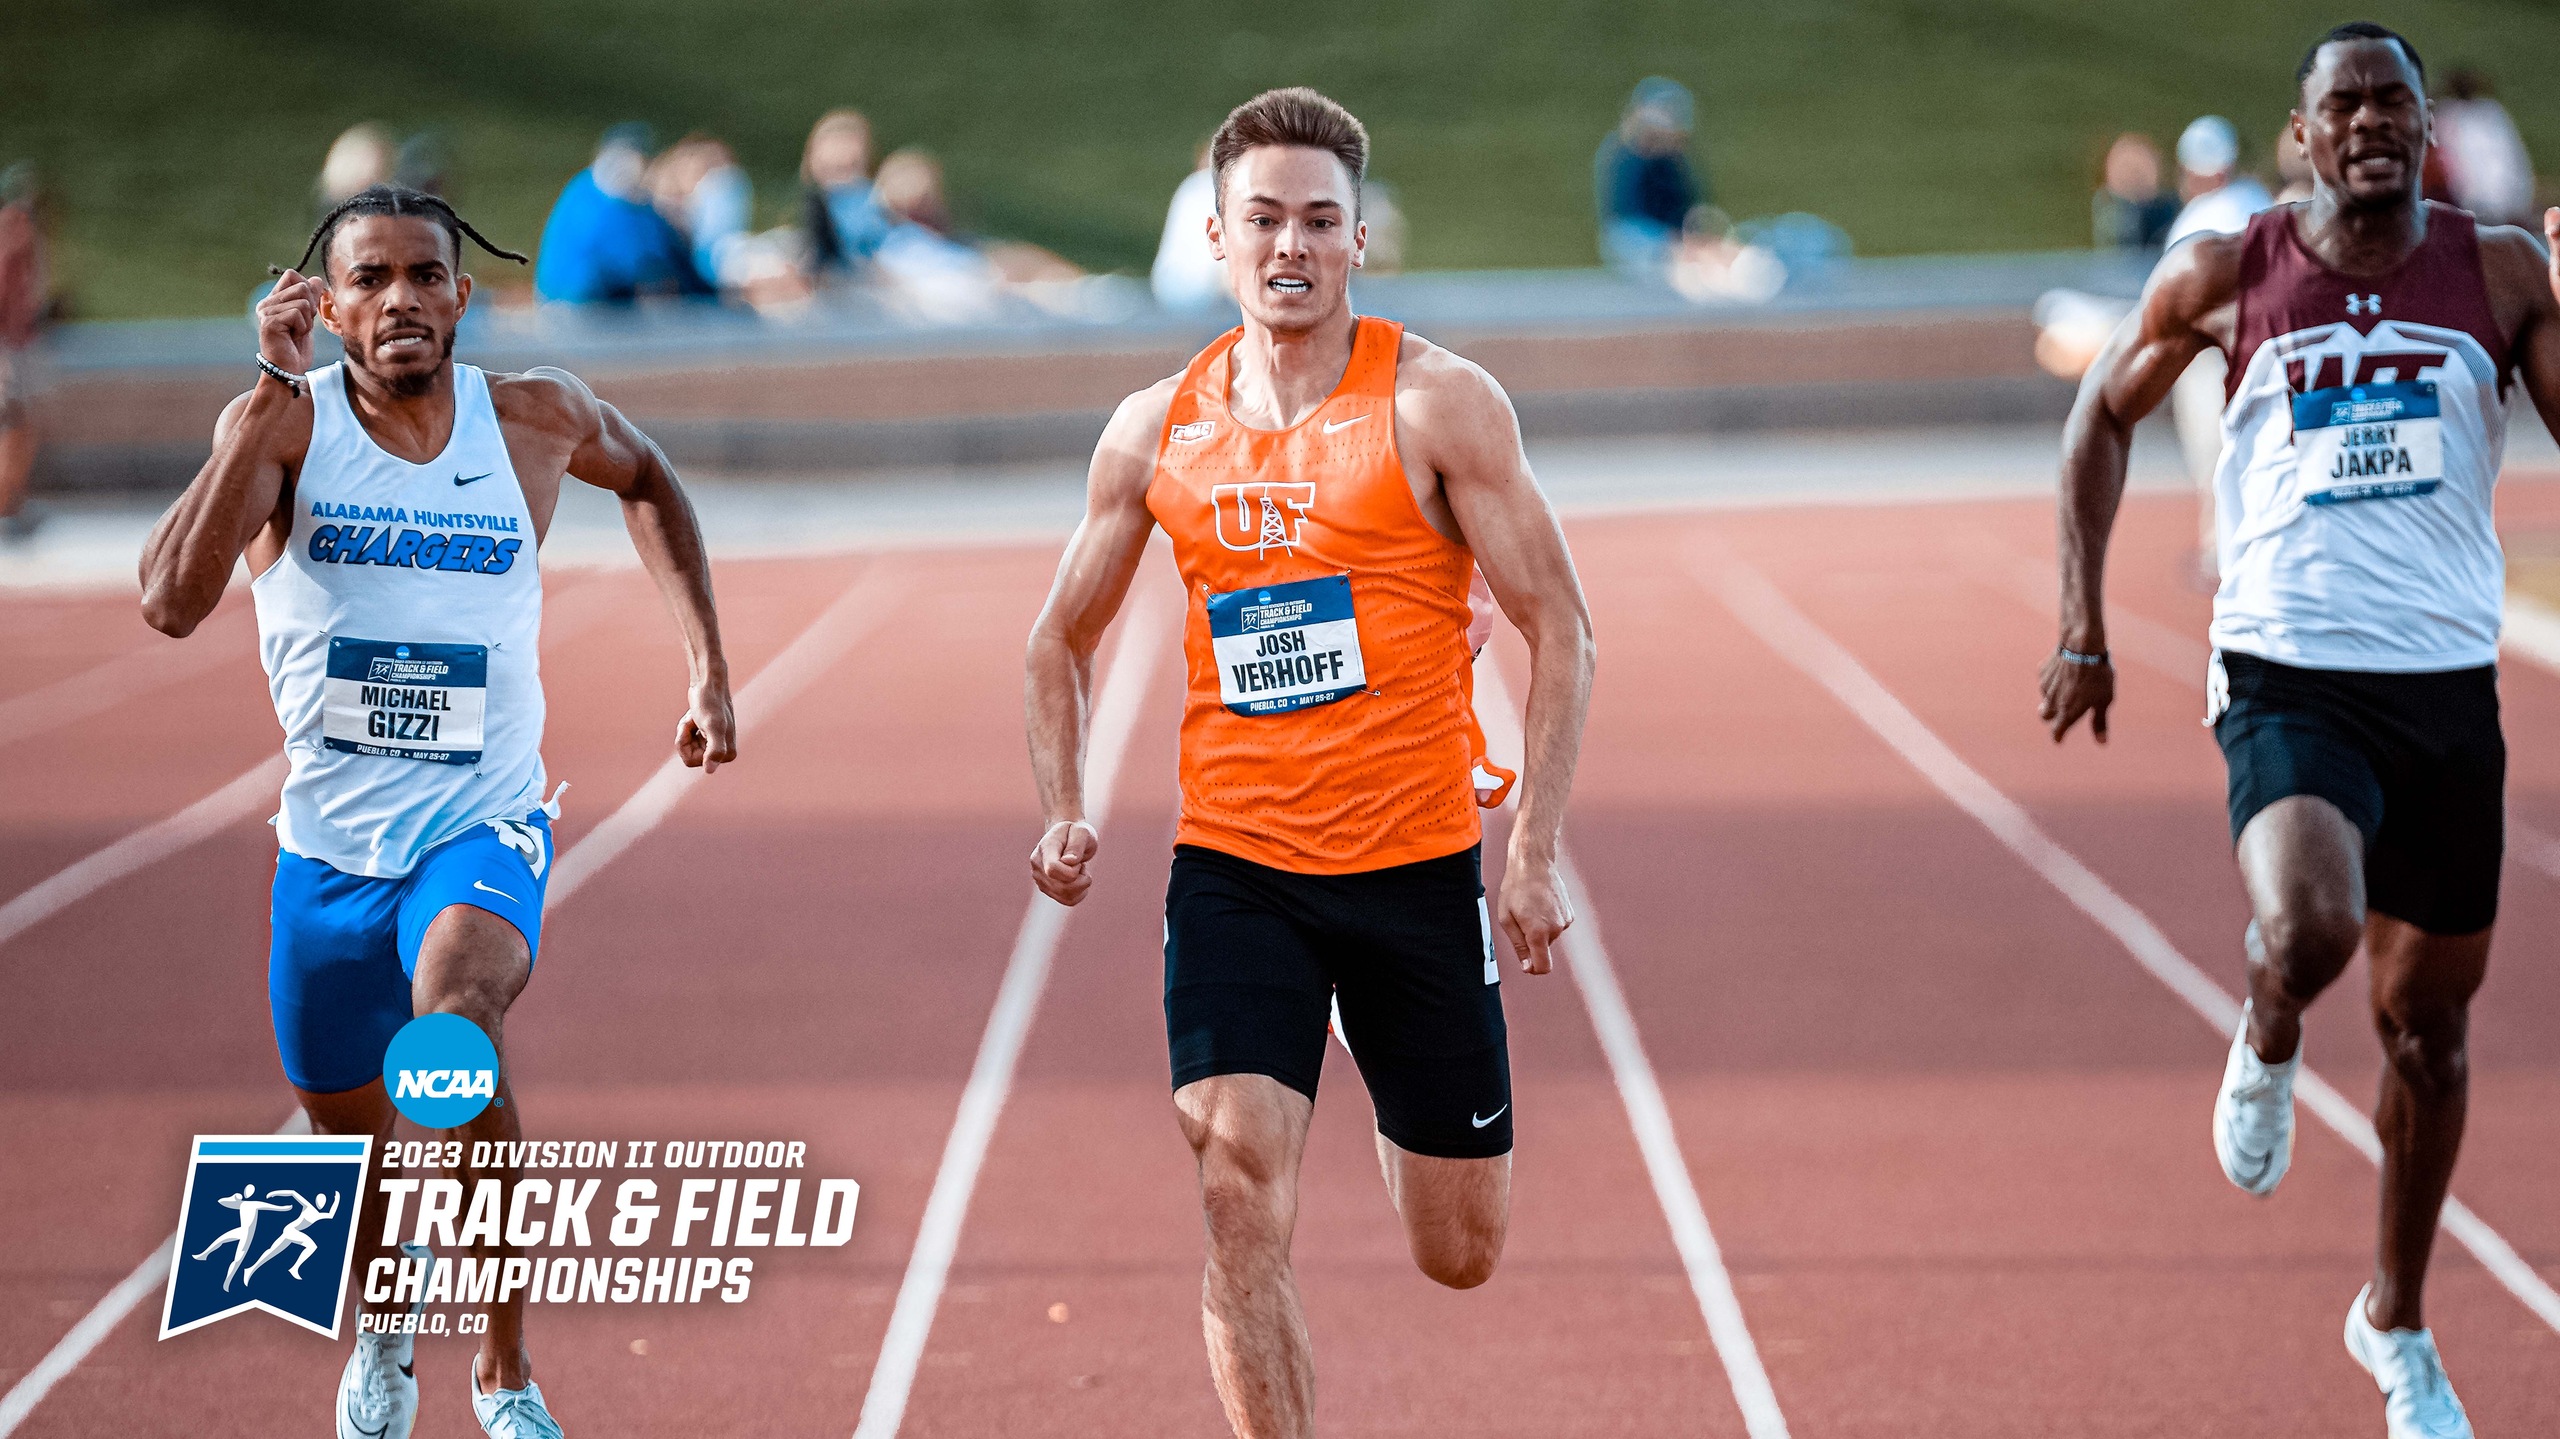 Verhoff Breaks 200m Record on Day 2 of Outdoor National Championship